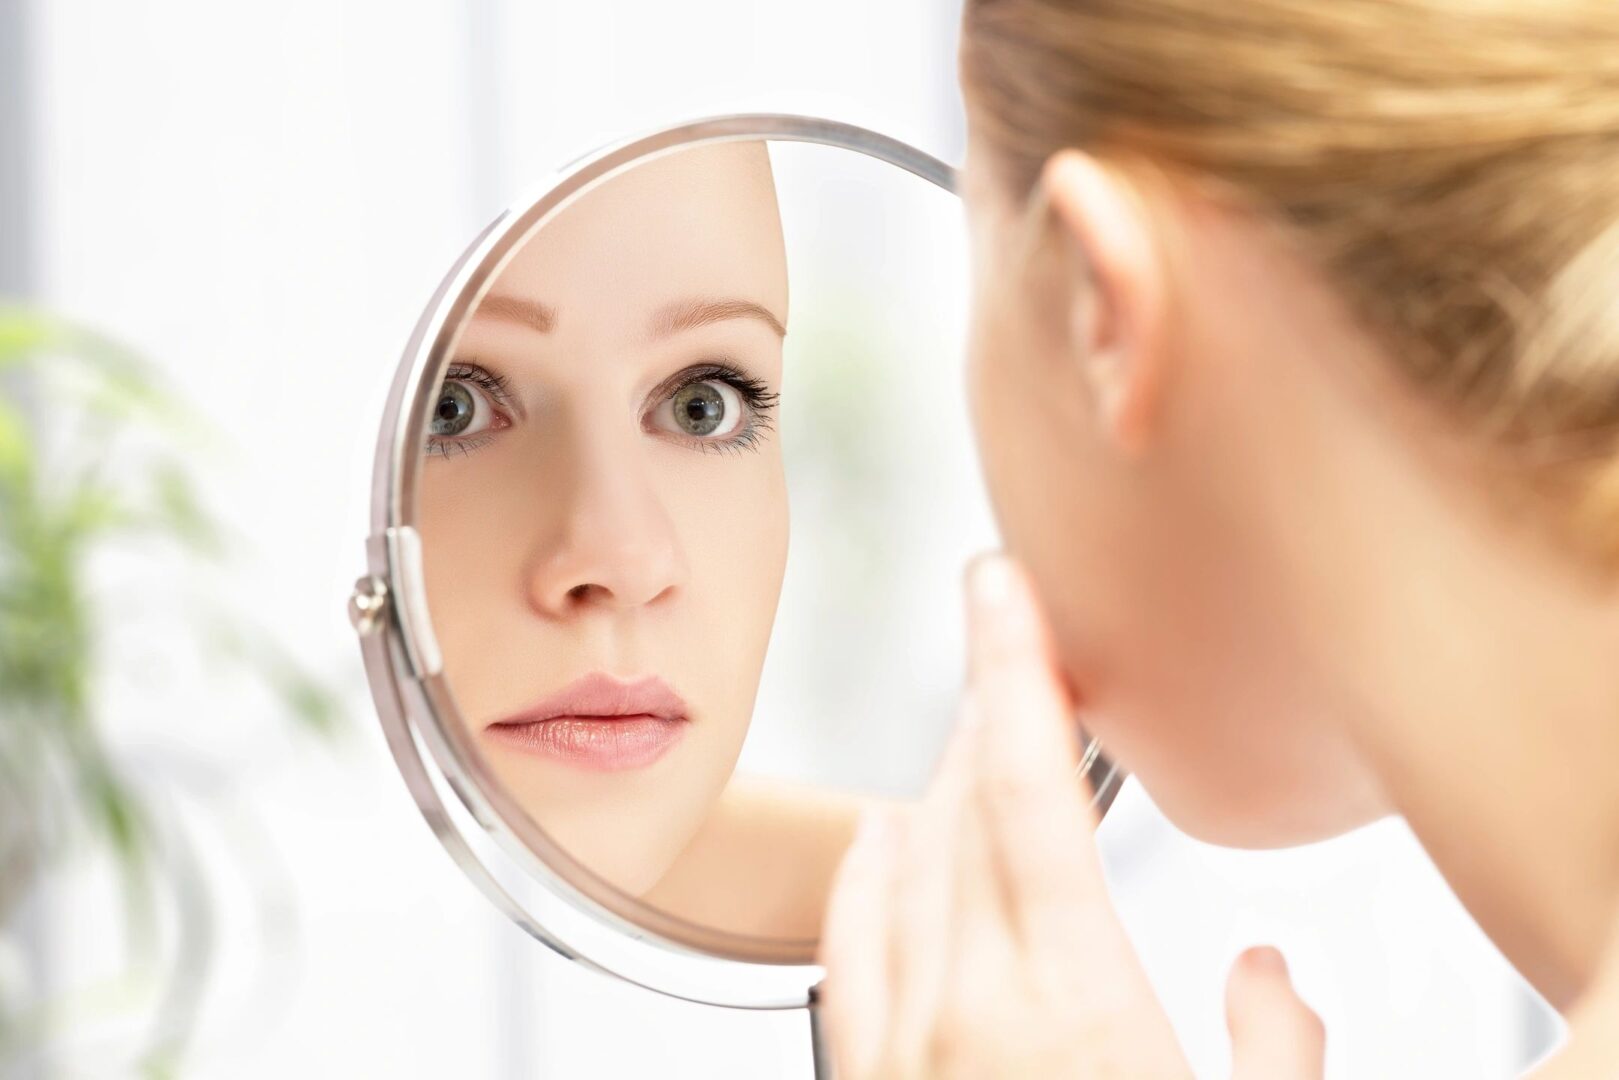 A woman examining her face in a mirror